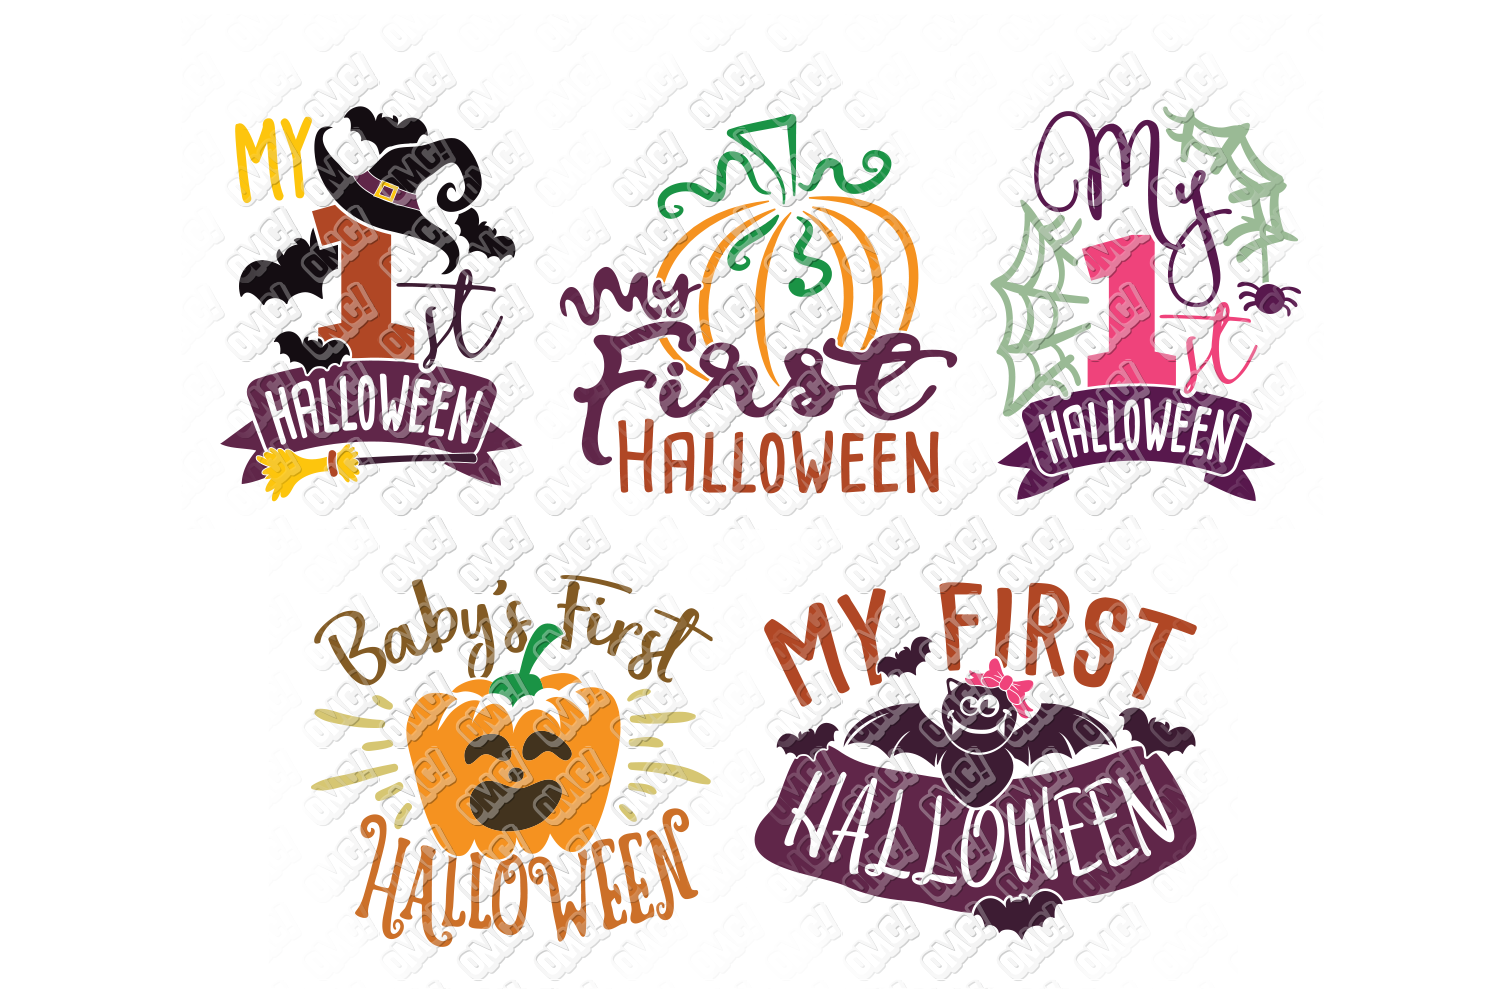 Download My First Halloween SVG in SVG, DXF, PNG, EPS, JPEG